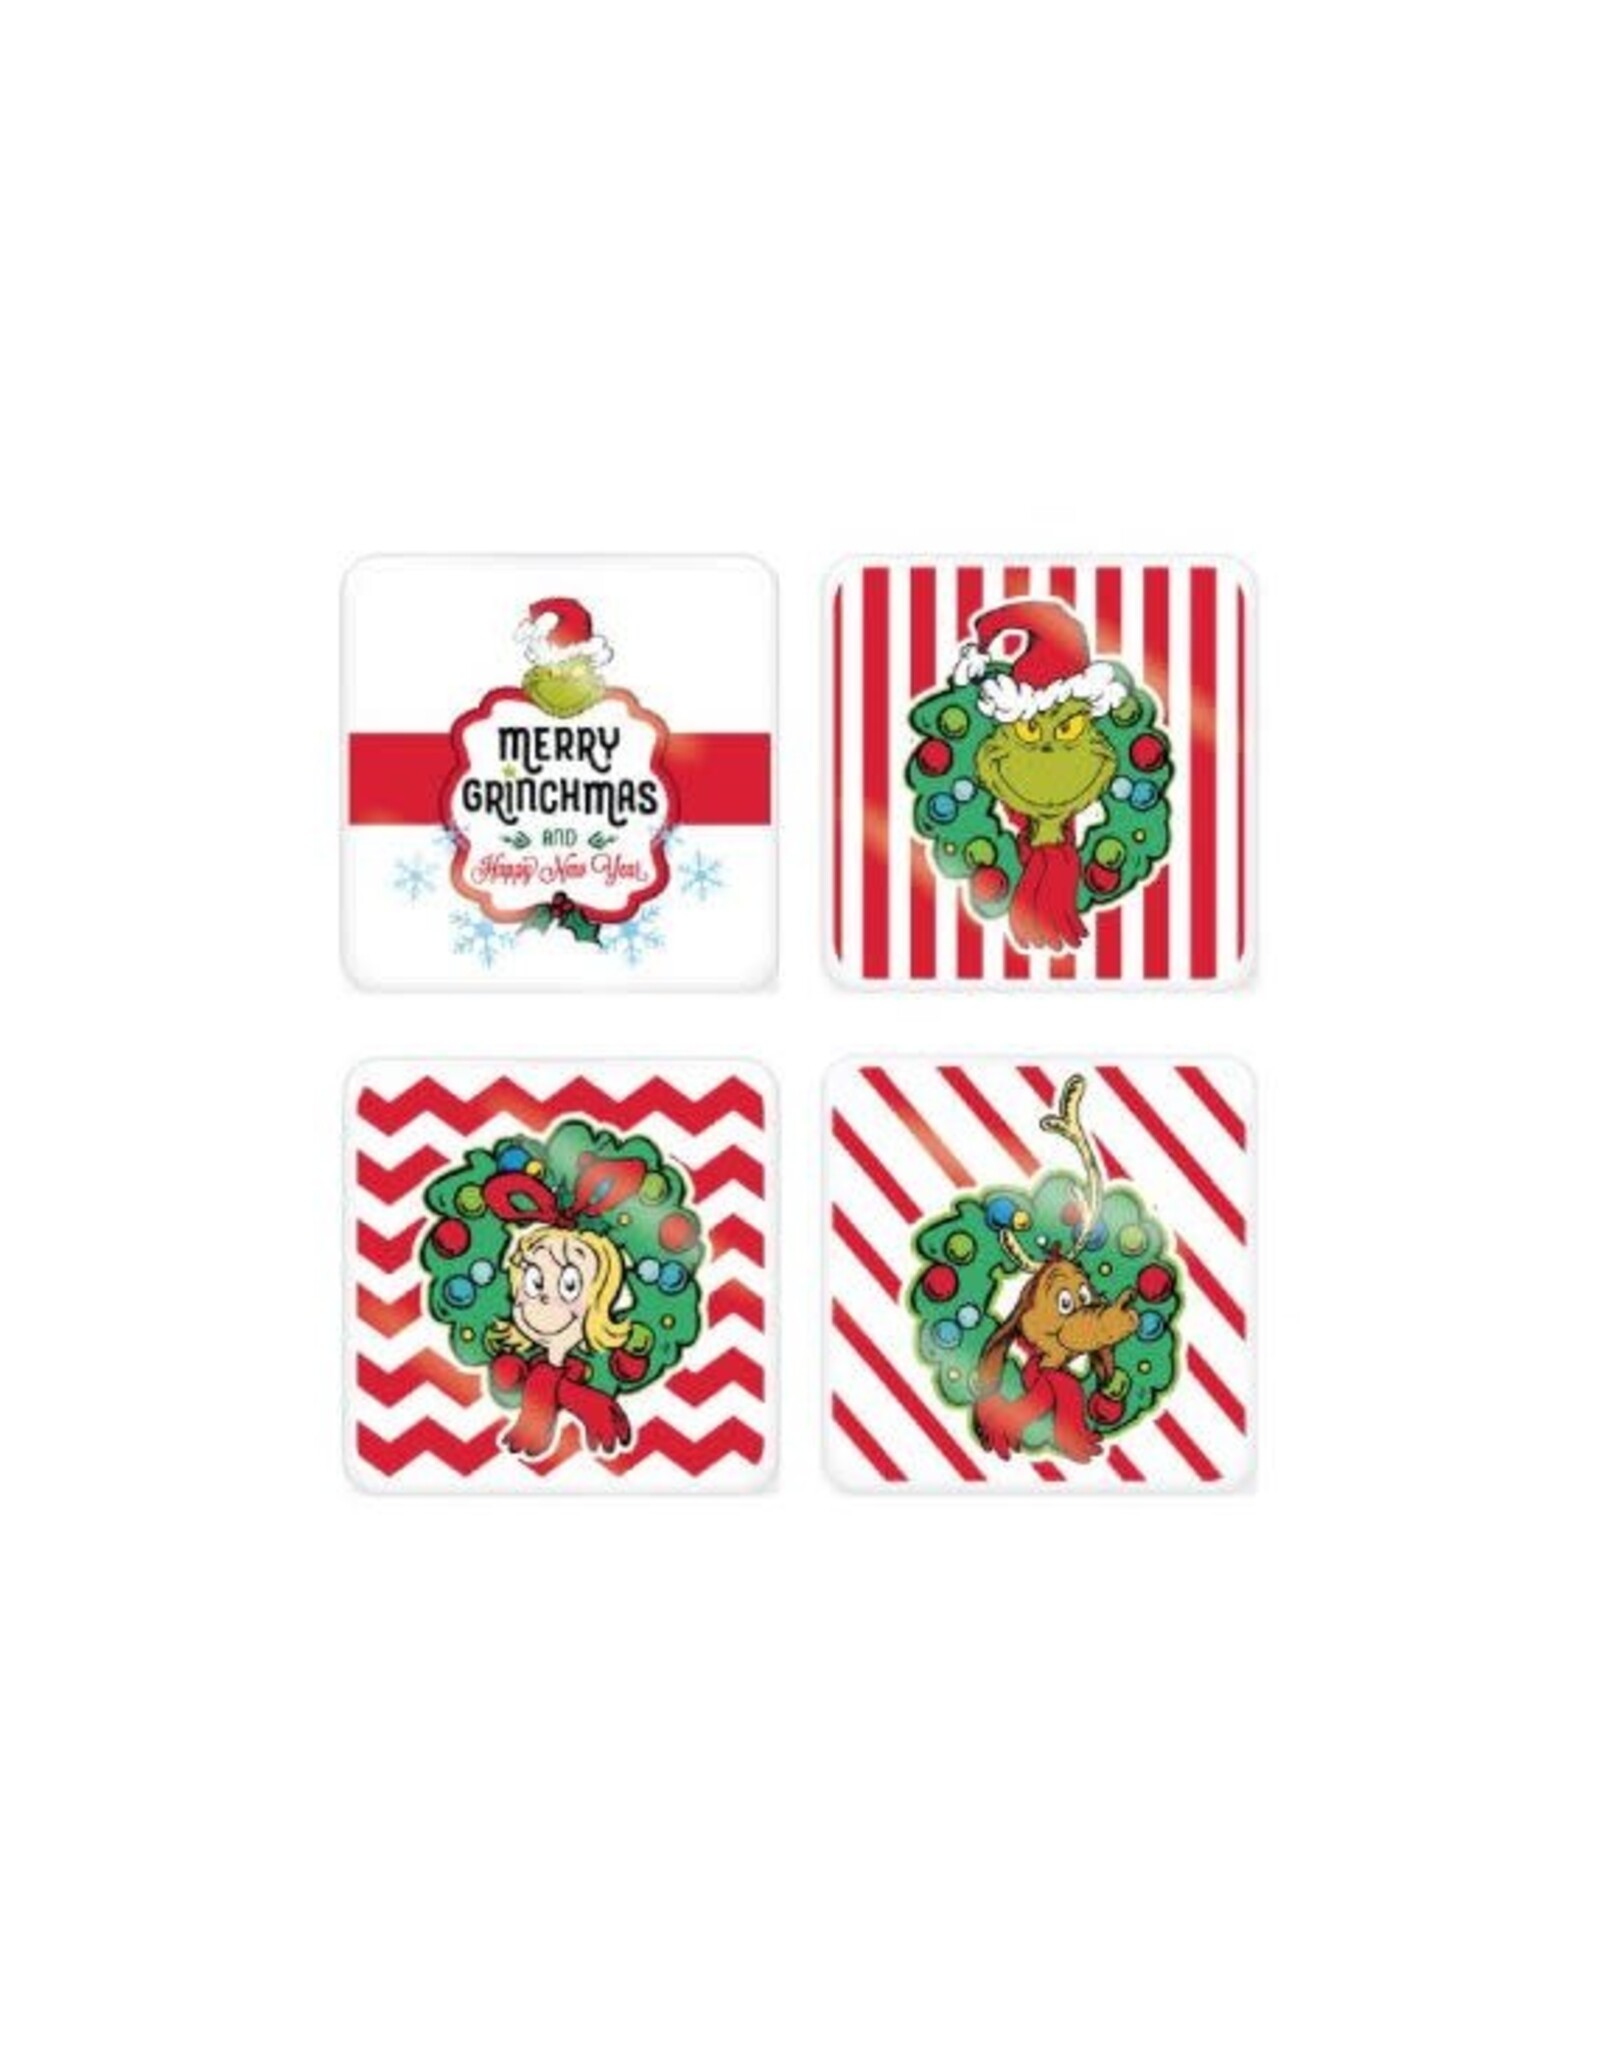 Bioworld The Grinch Cindy Lou And Max Holiday Ceramic Coasters Set of 4